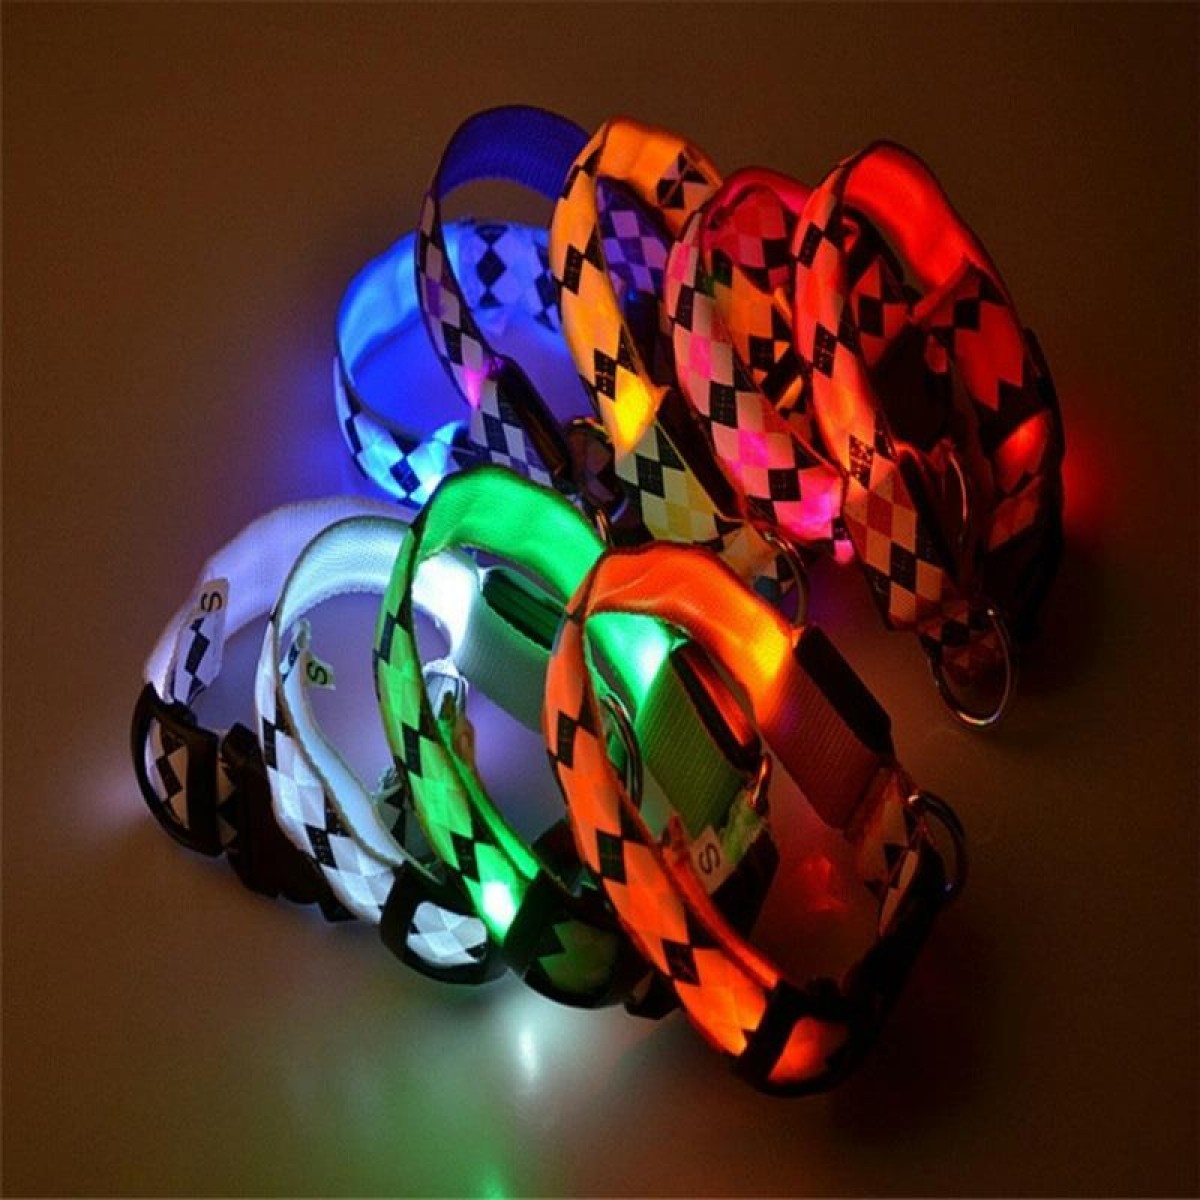 Plaid Pattern Rechargeable LED Glow Light Leads Pet Dog Collar for Small Medium Dogs, Size:L(Yellow)